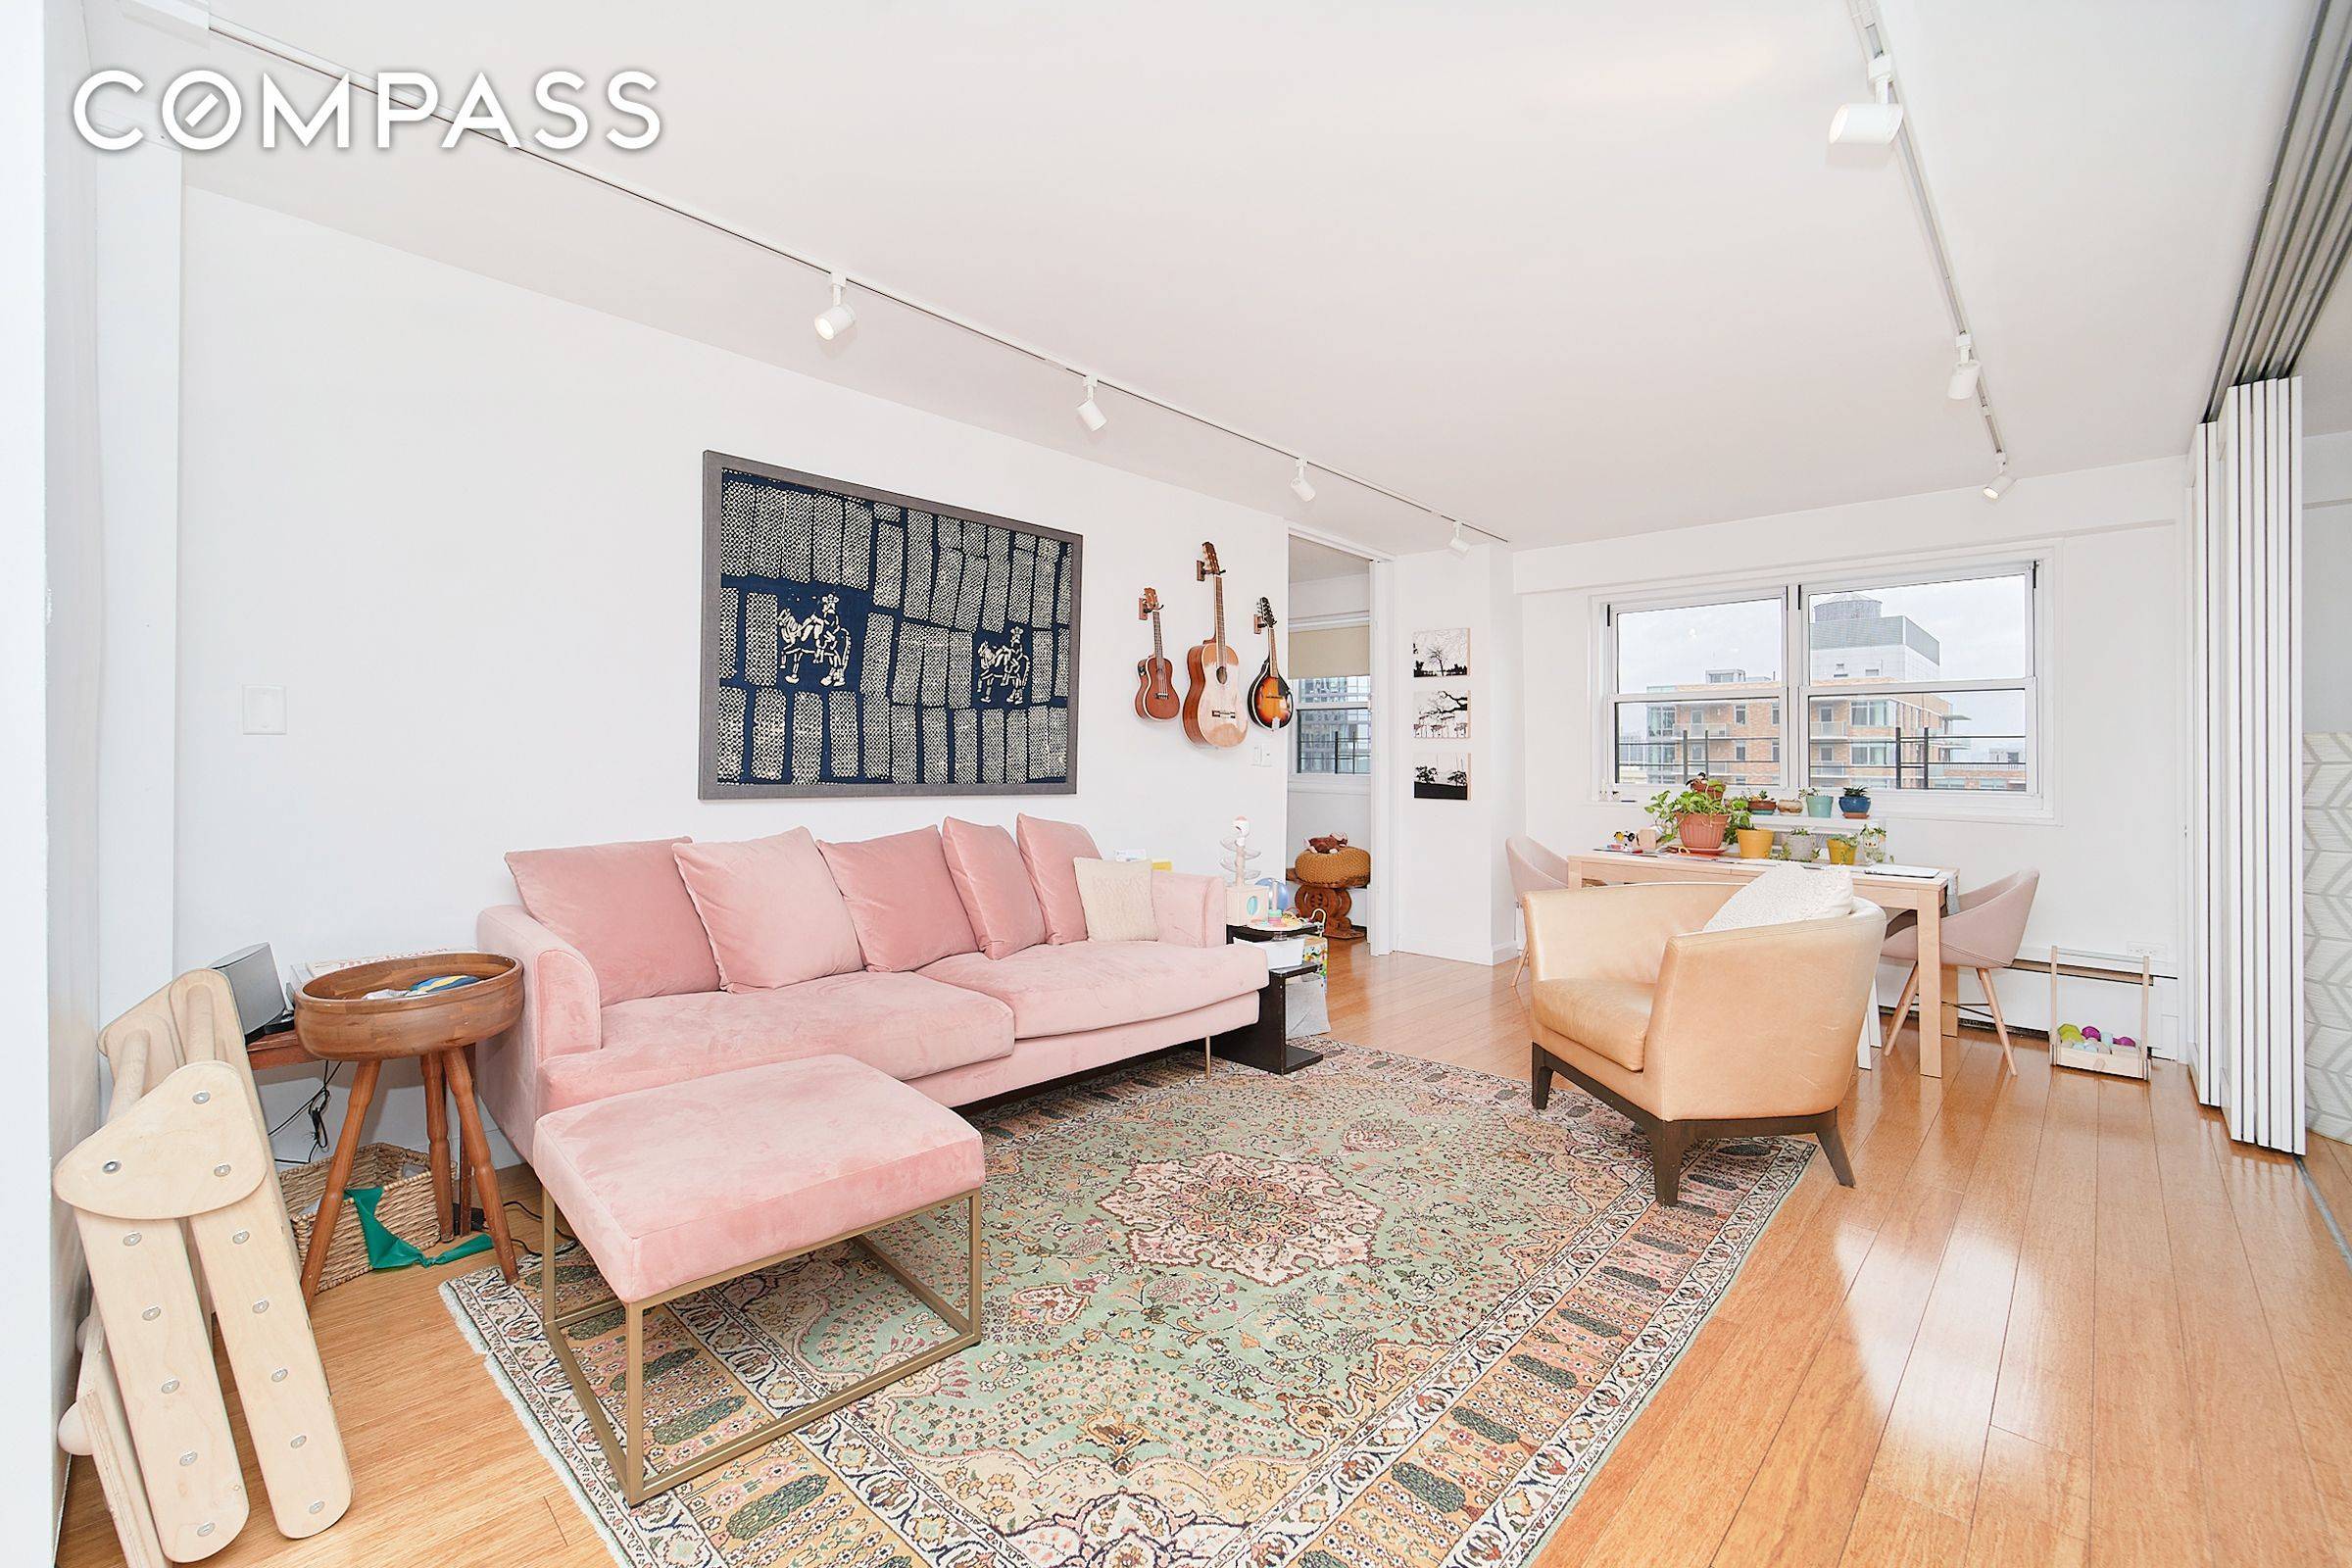 Available July 11th. This immaculate flexible four bedroom penthouse apartment has been updated to provide a convenient experience not seen often.